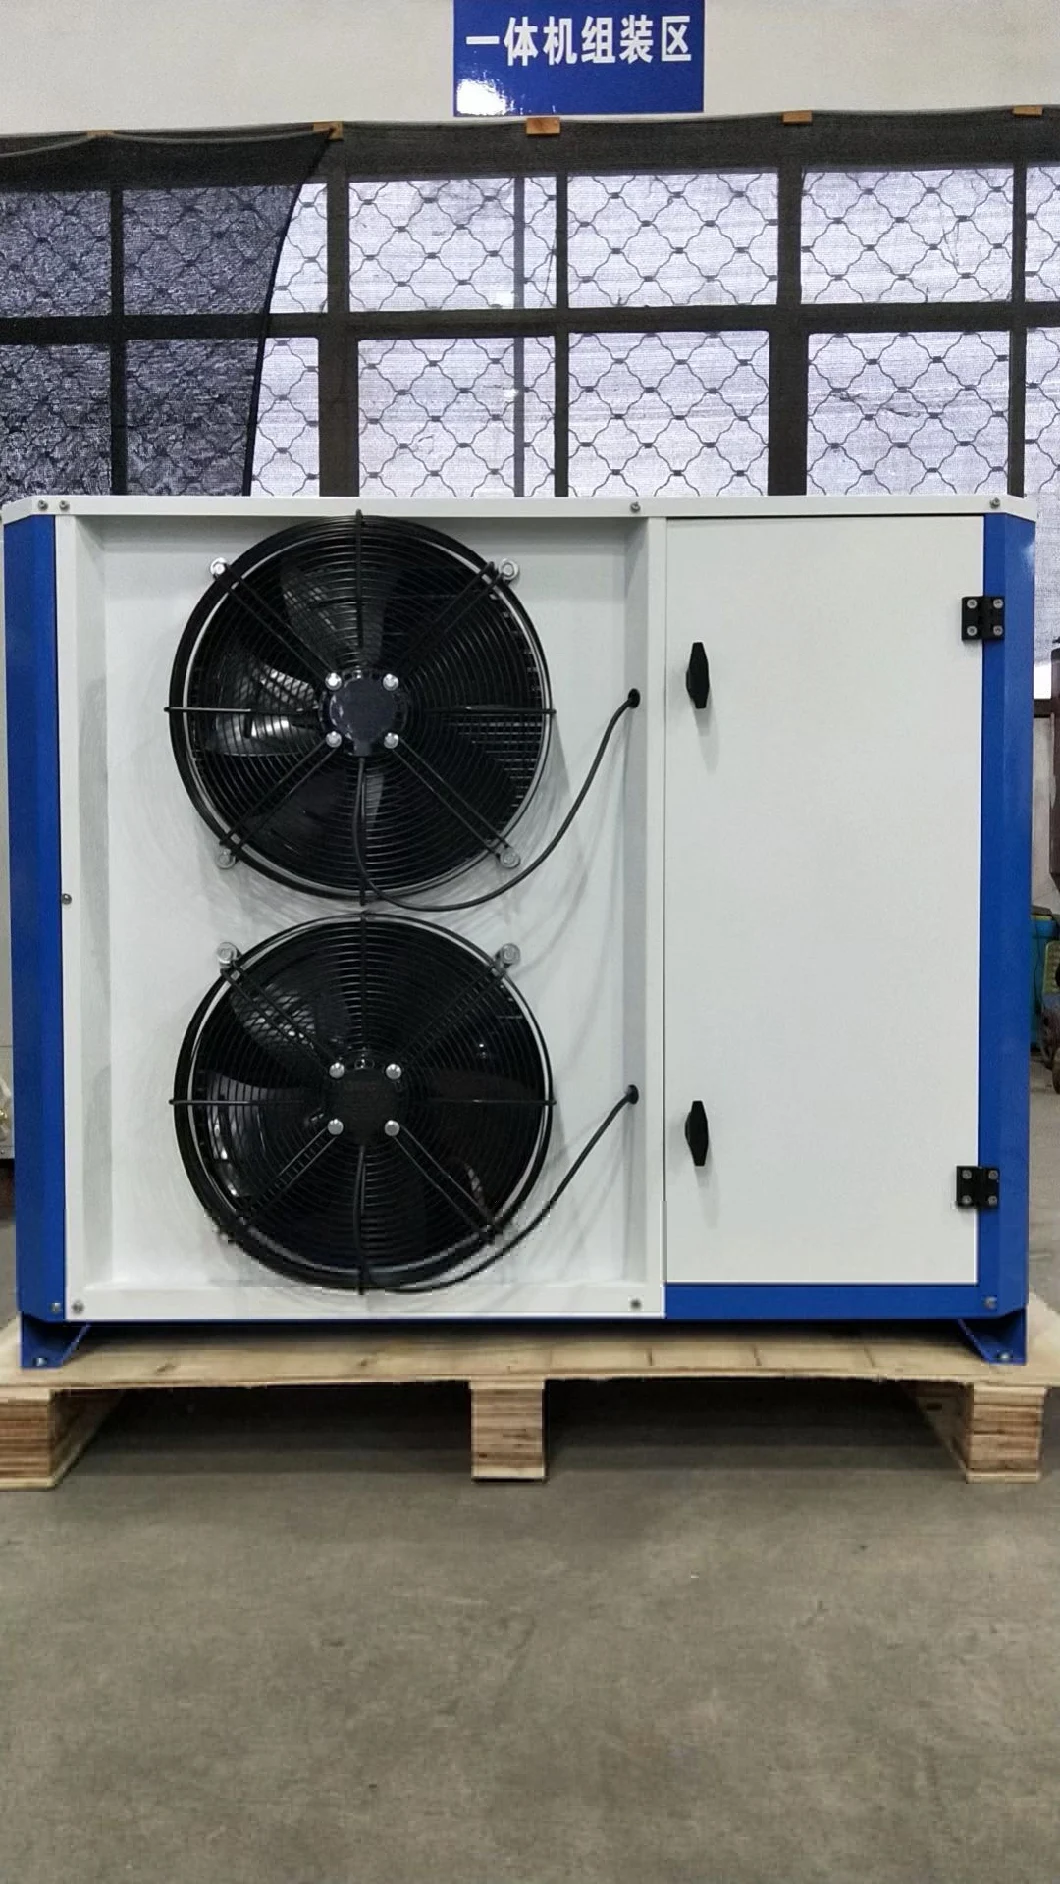 Factory Low Price 15HP Box U Type Industrial Condensing Units Air Cooled Freezer R404A/R22